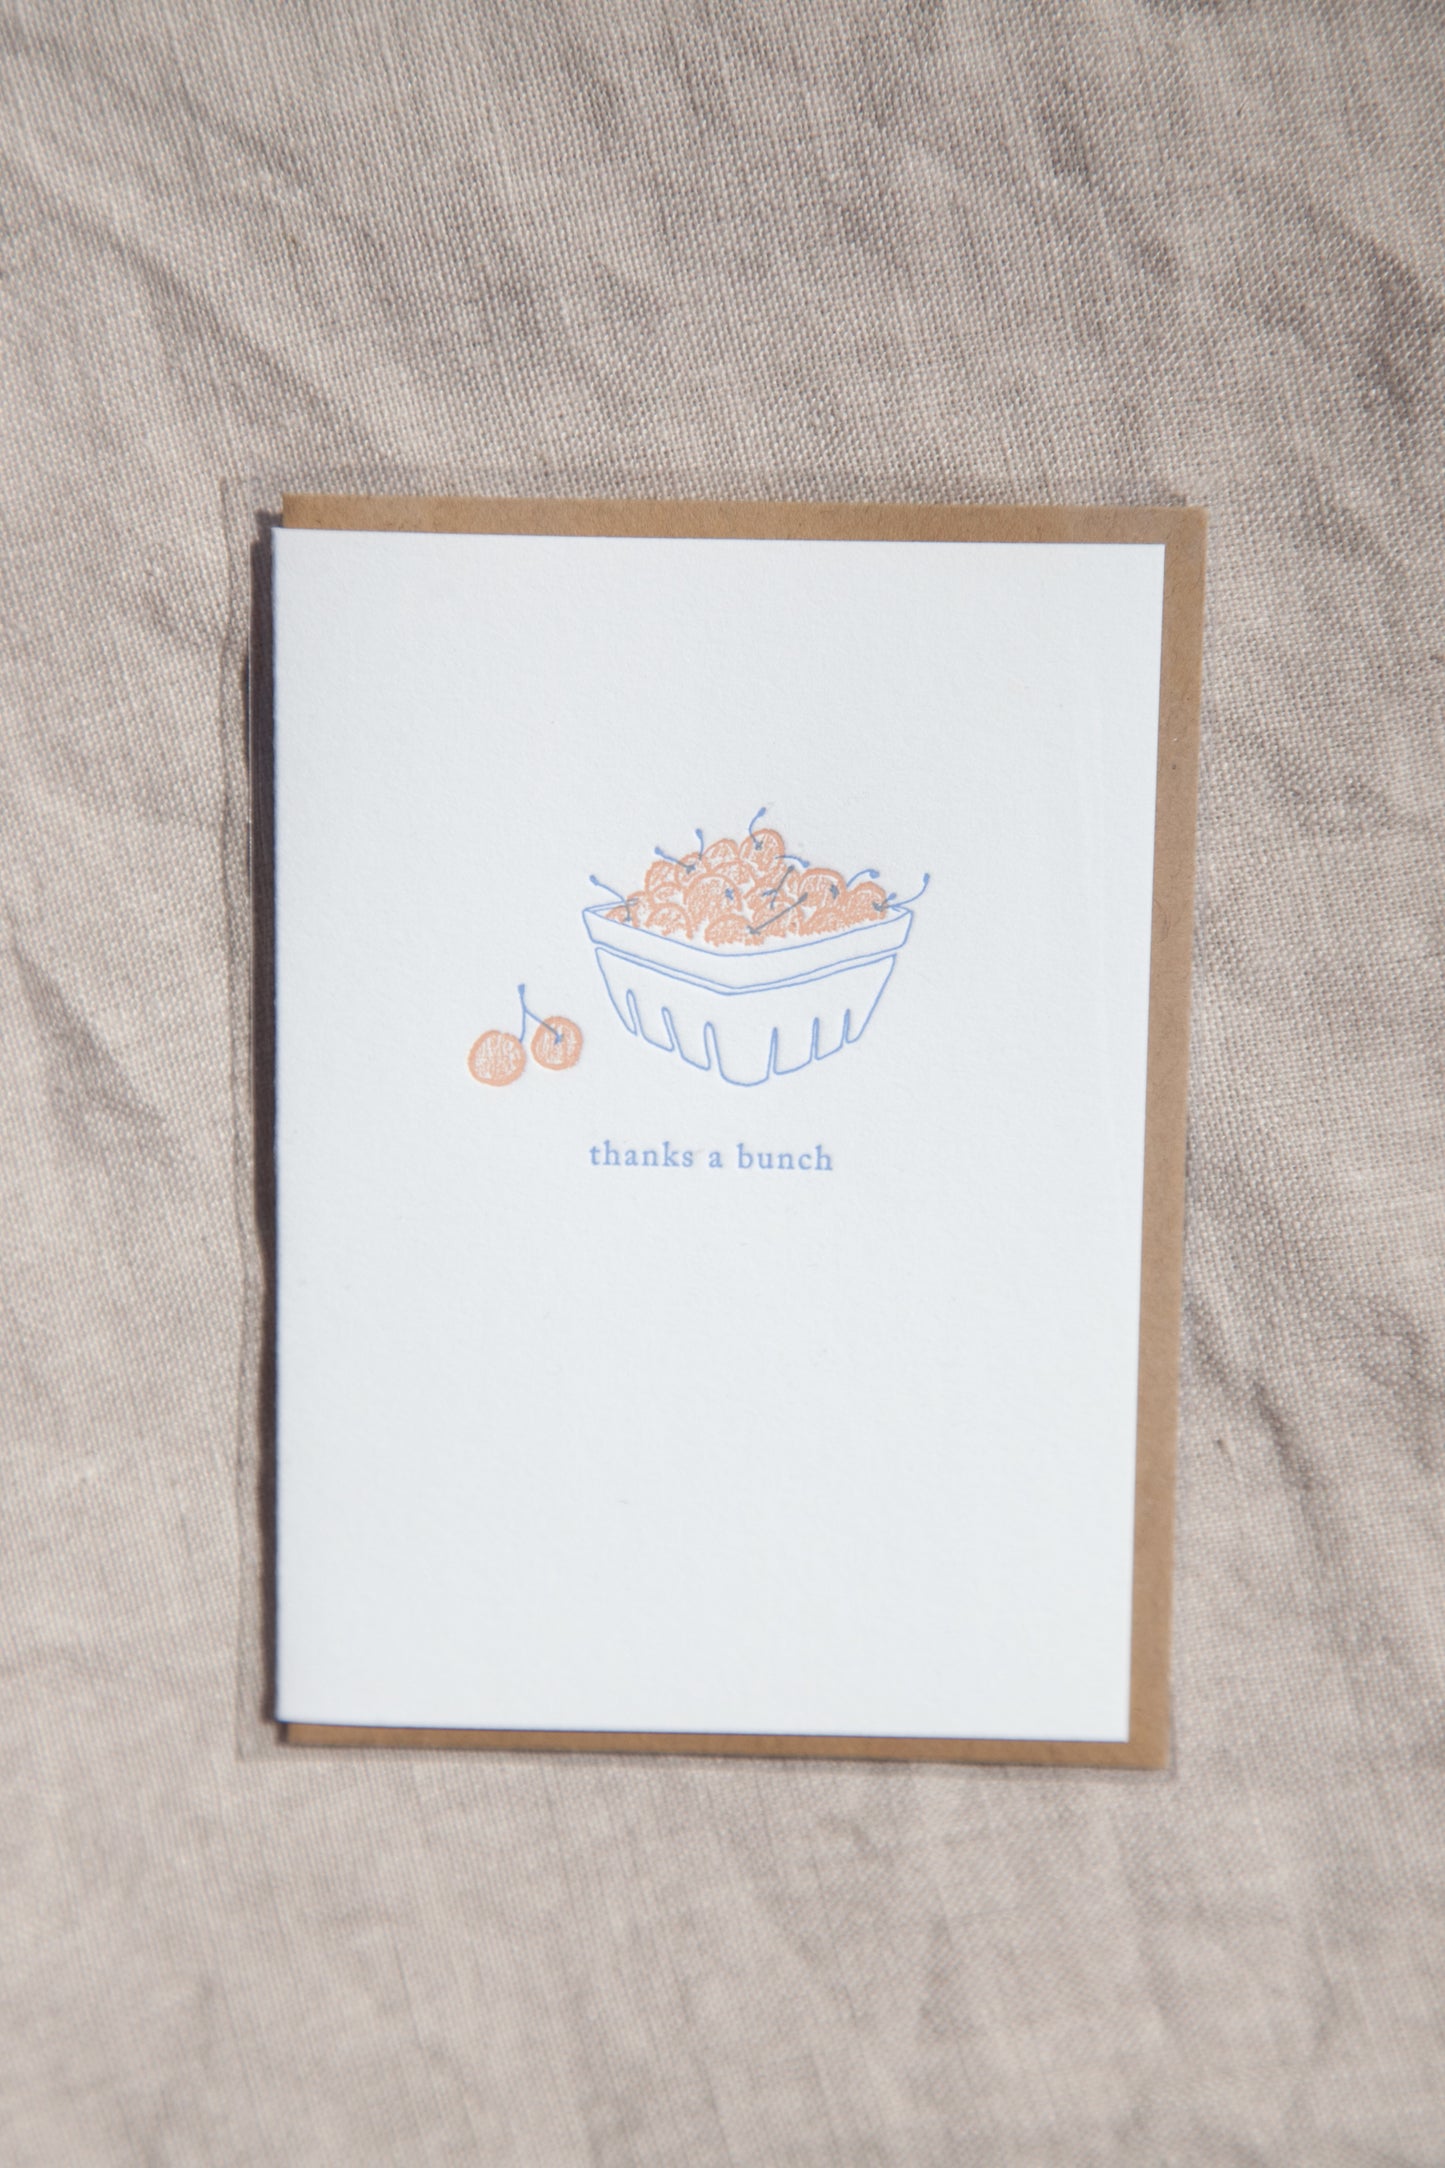 Berry Bunch Greeting Card